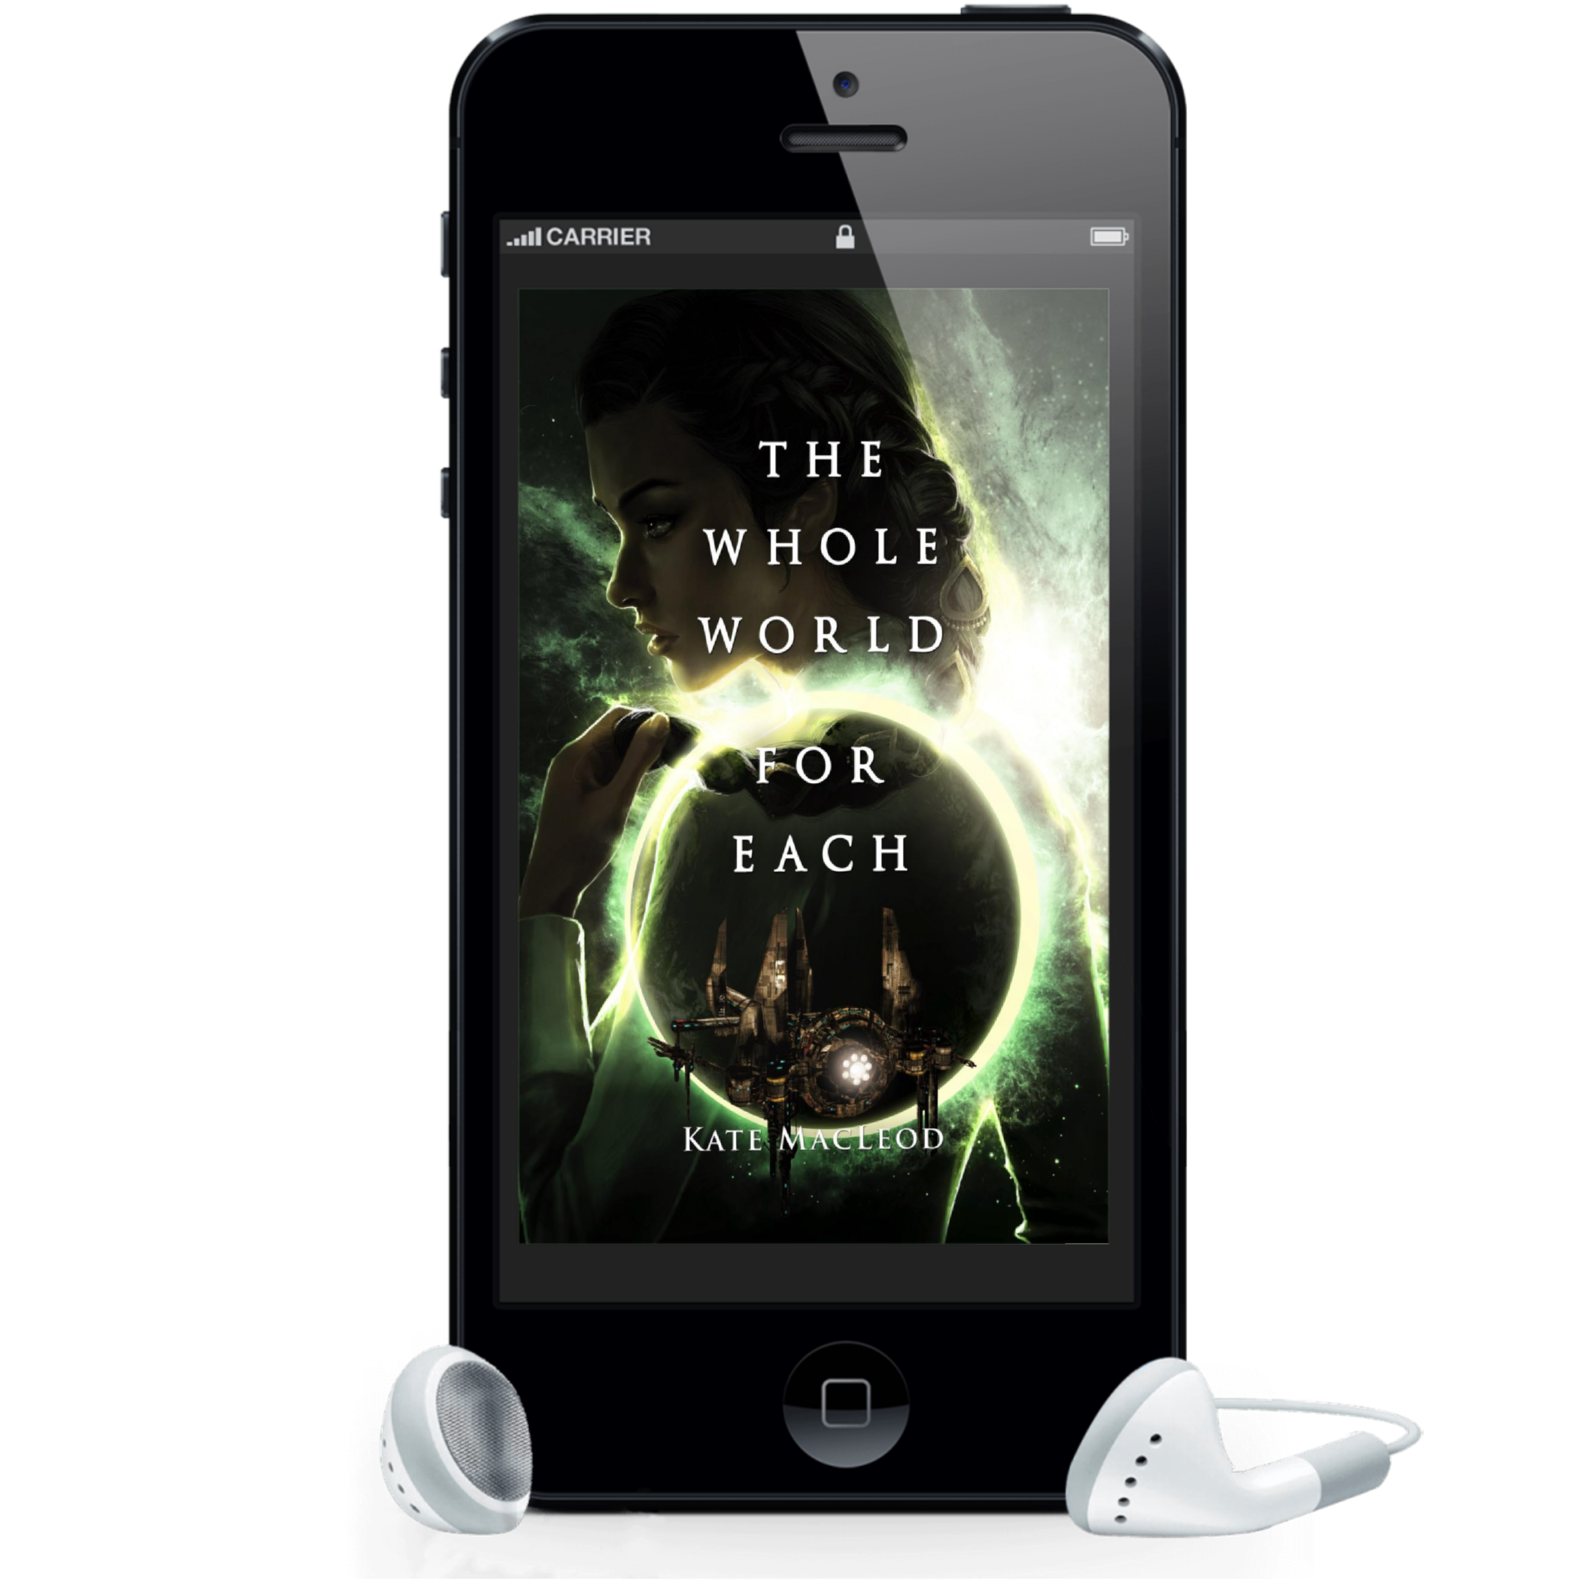 Cover for the audiobook of The Whole World for Each.